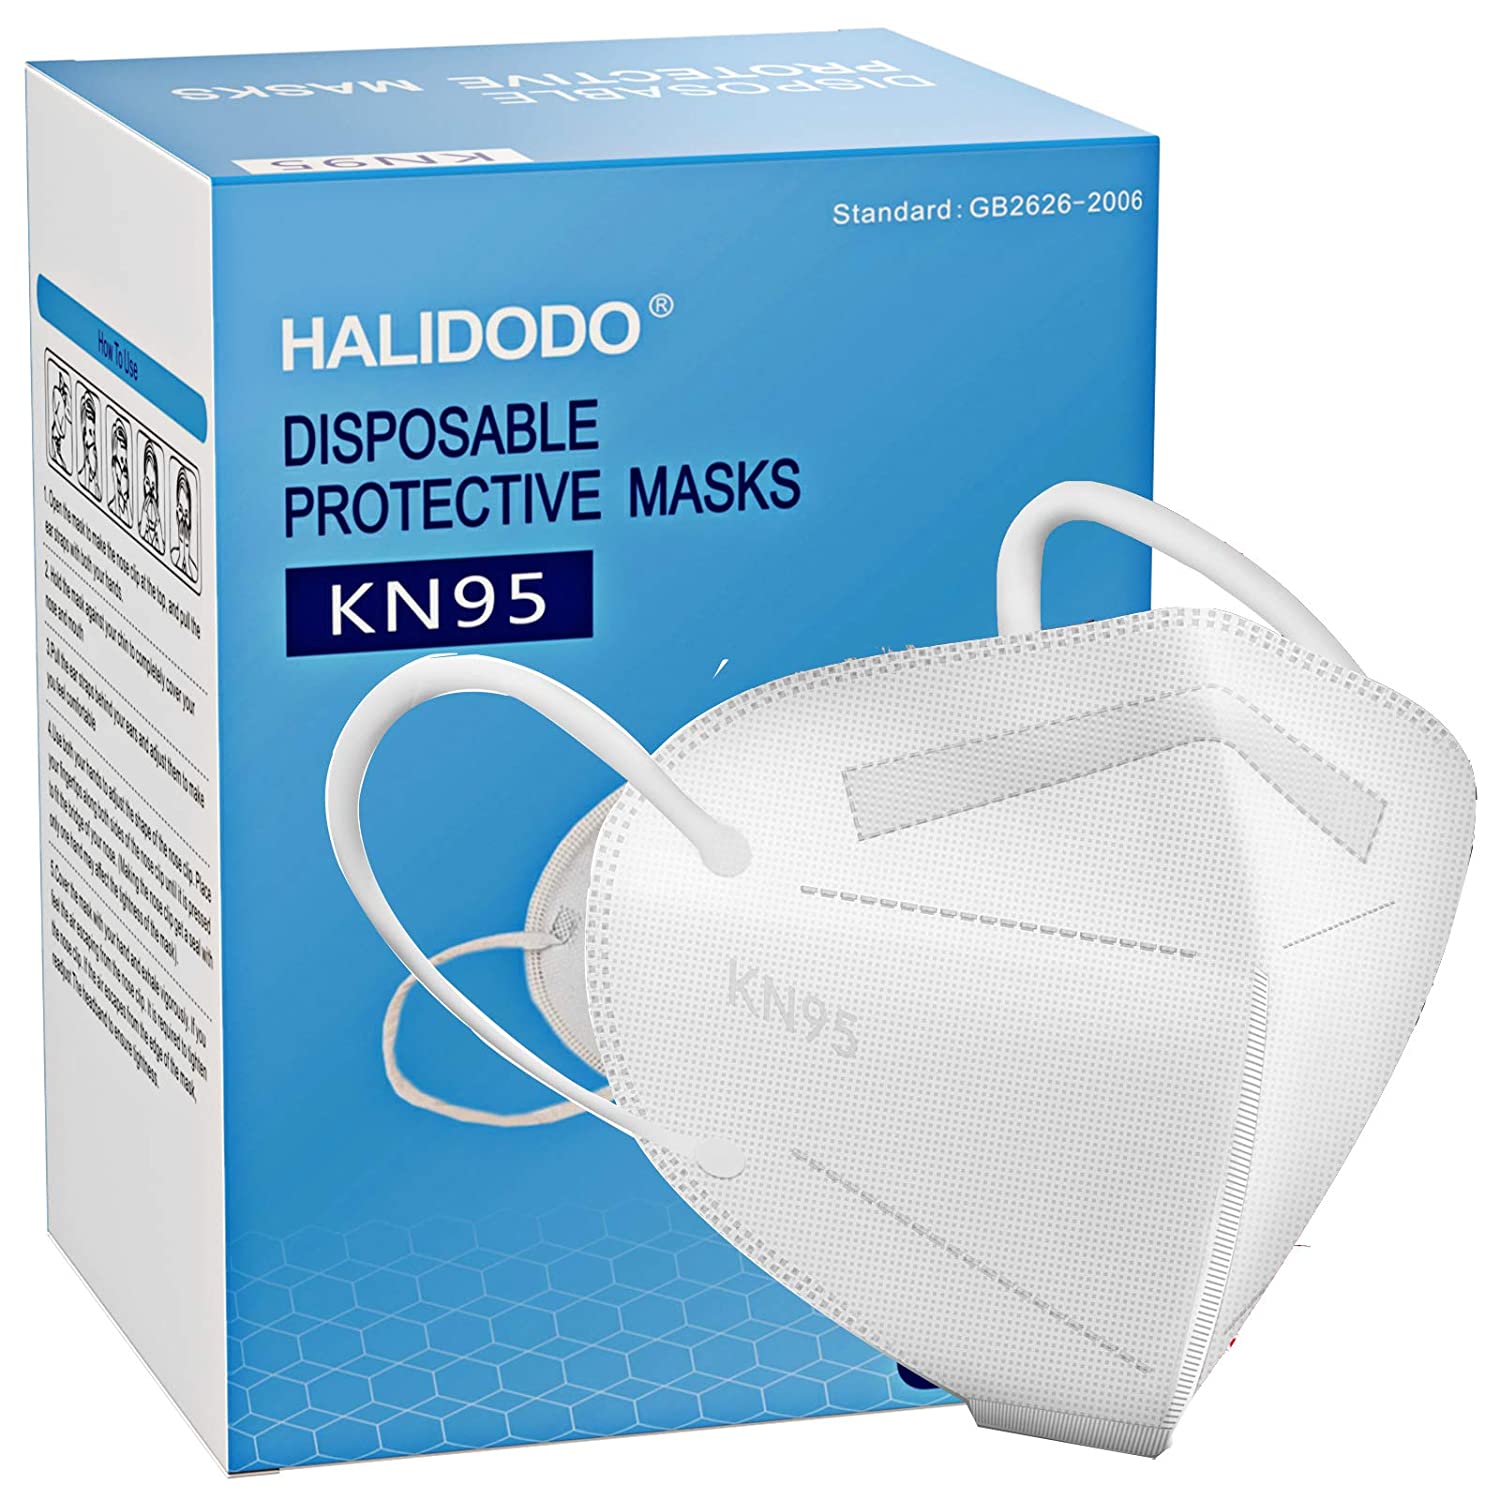 50-Packs KN95 FDA EUA Approved Face Masks $15.99 after coupon